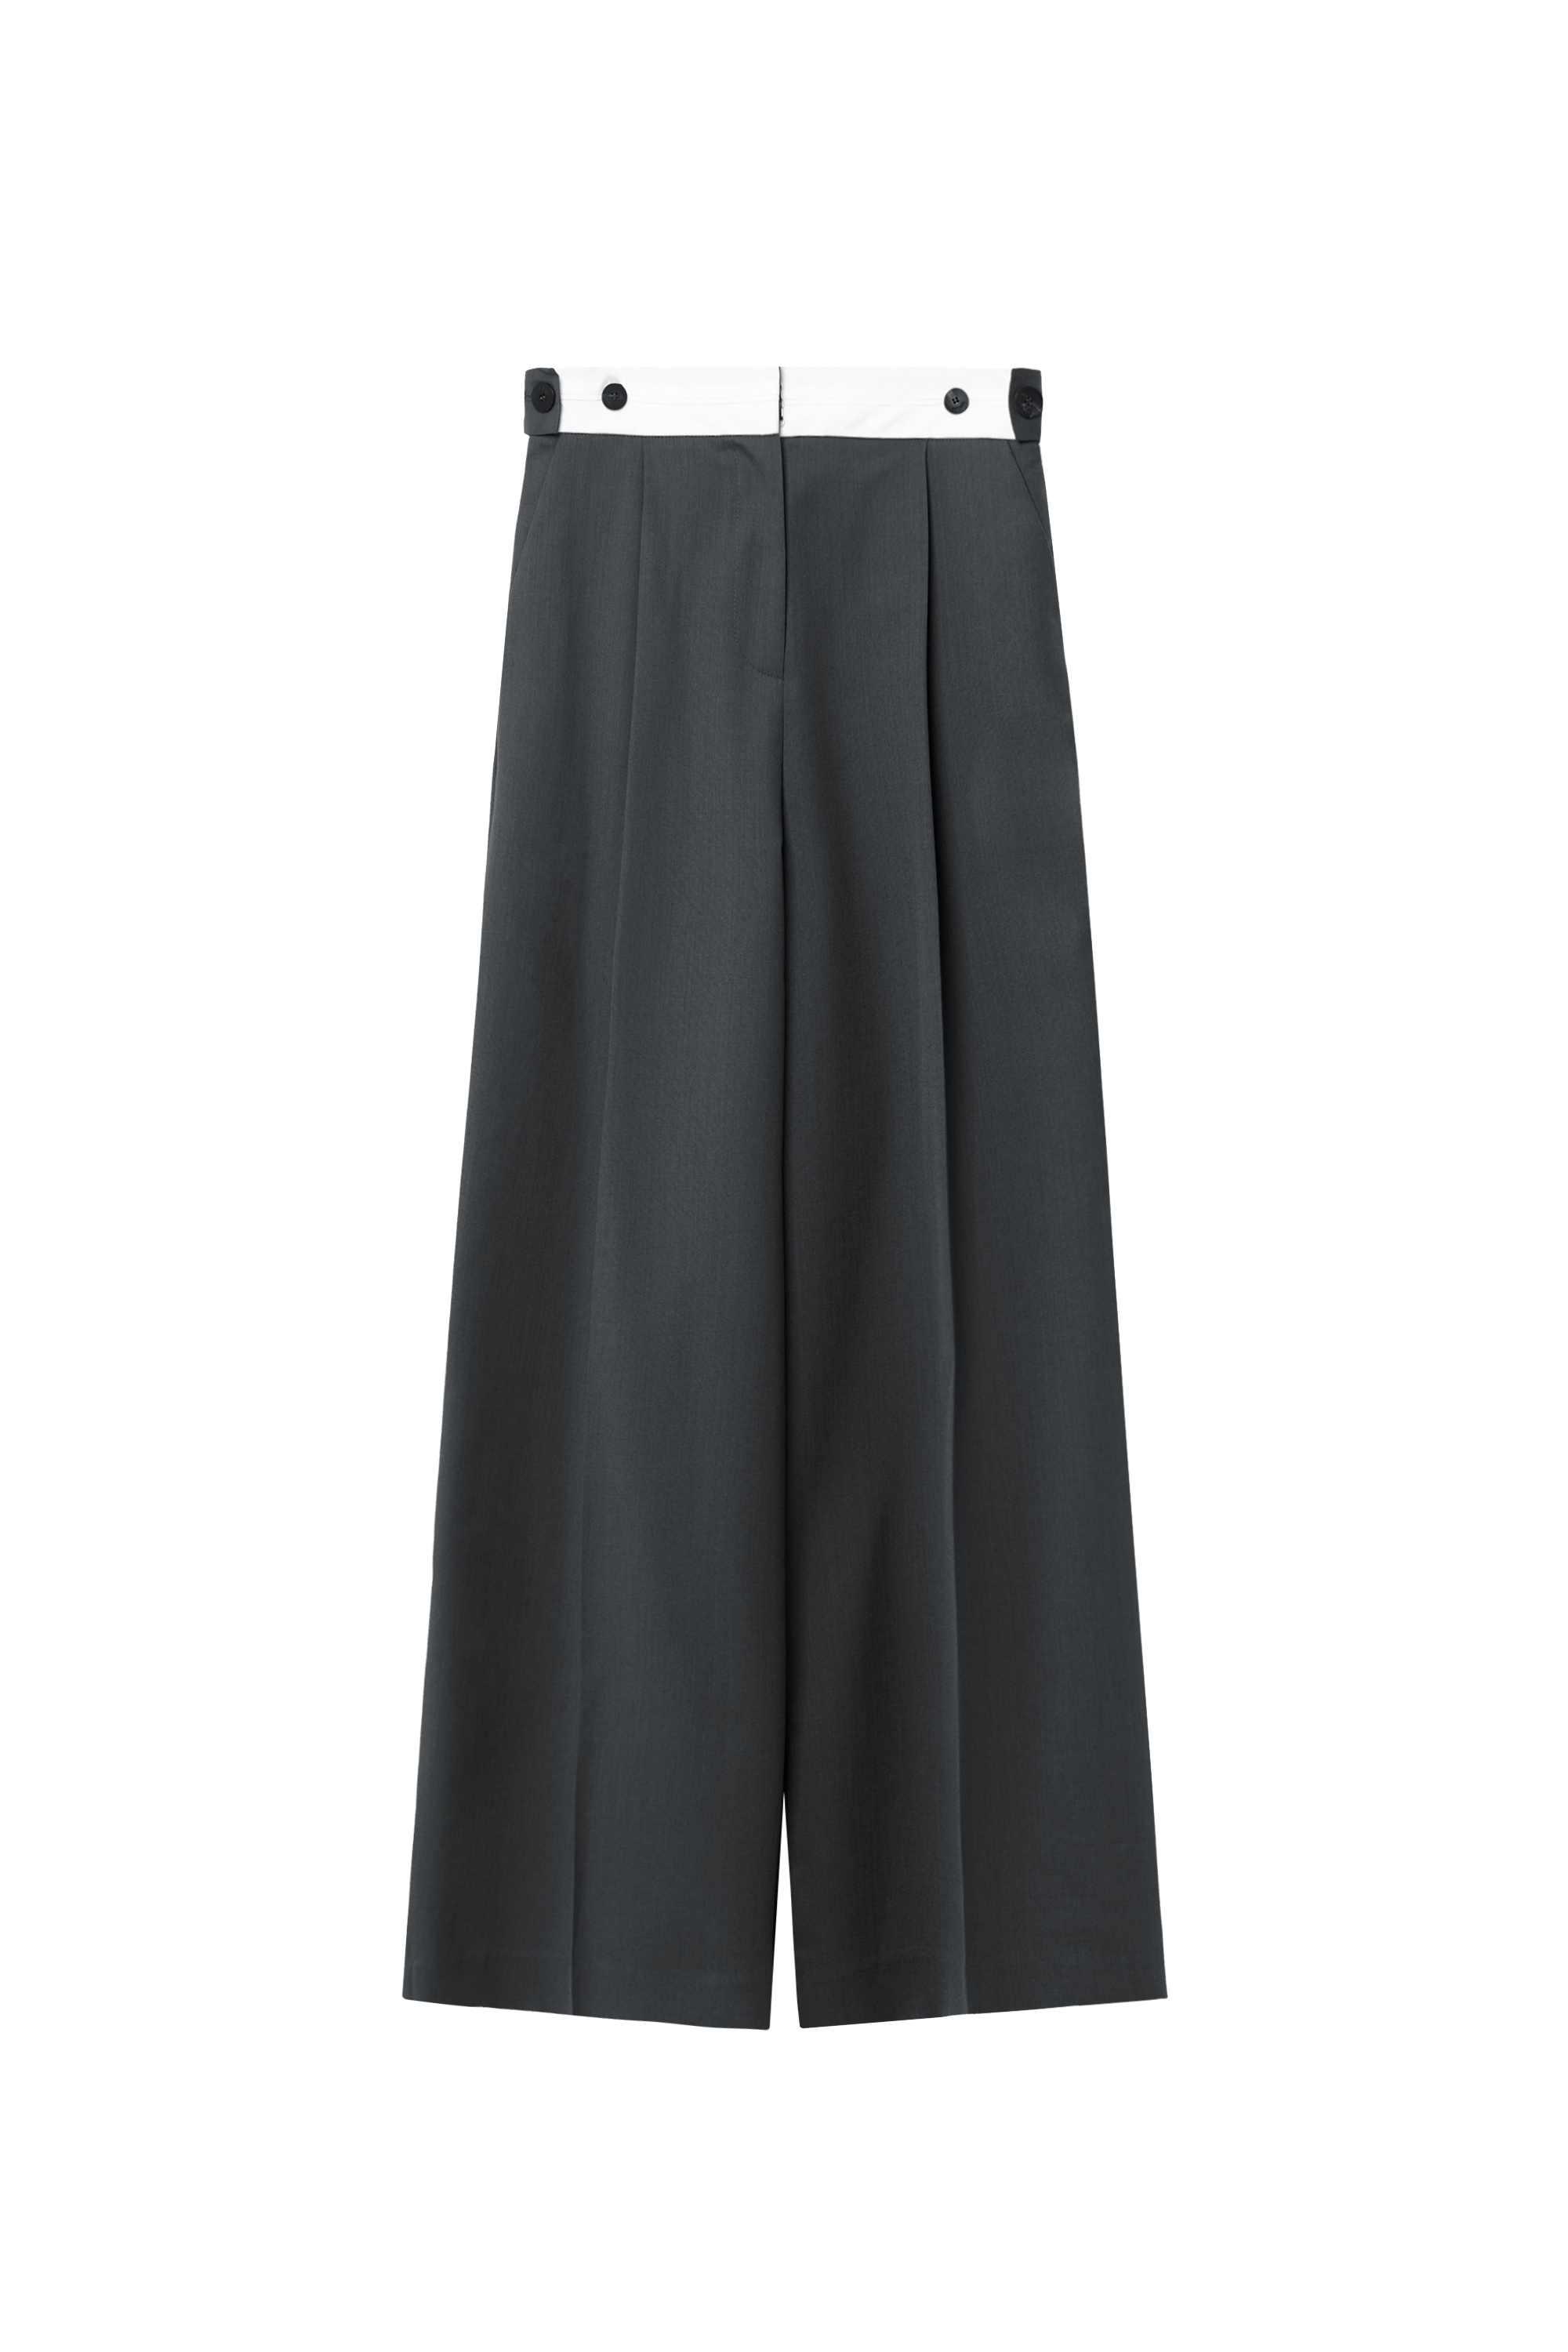 CURIE WAIST BAND TROUSERS